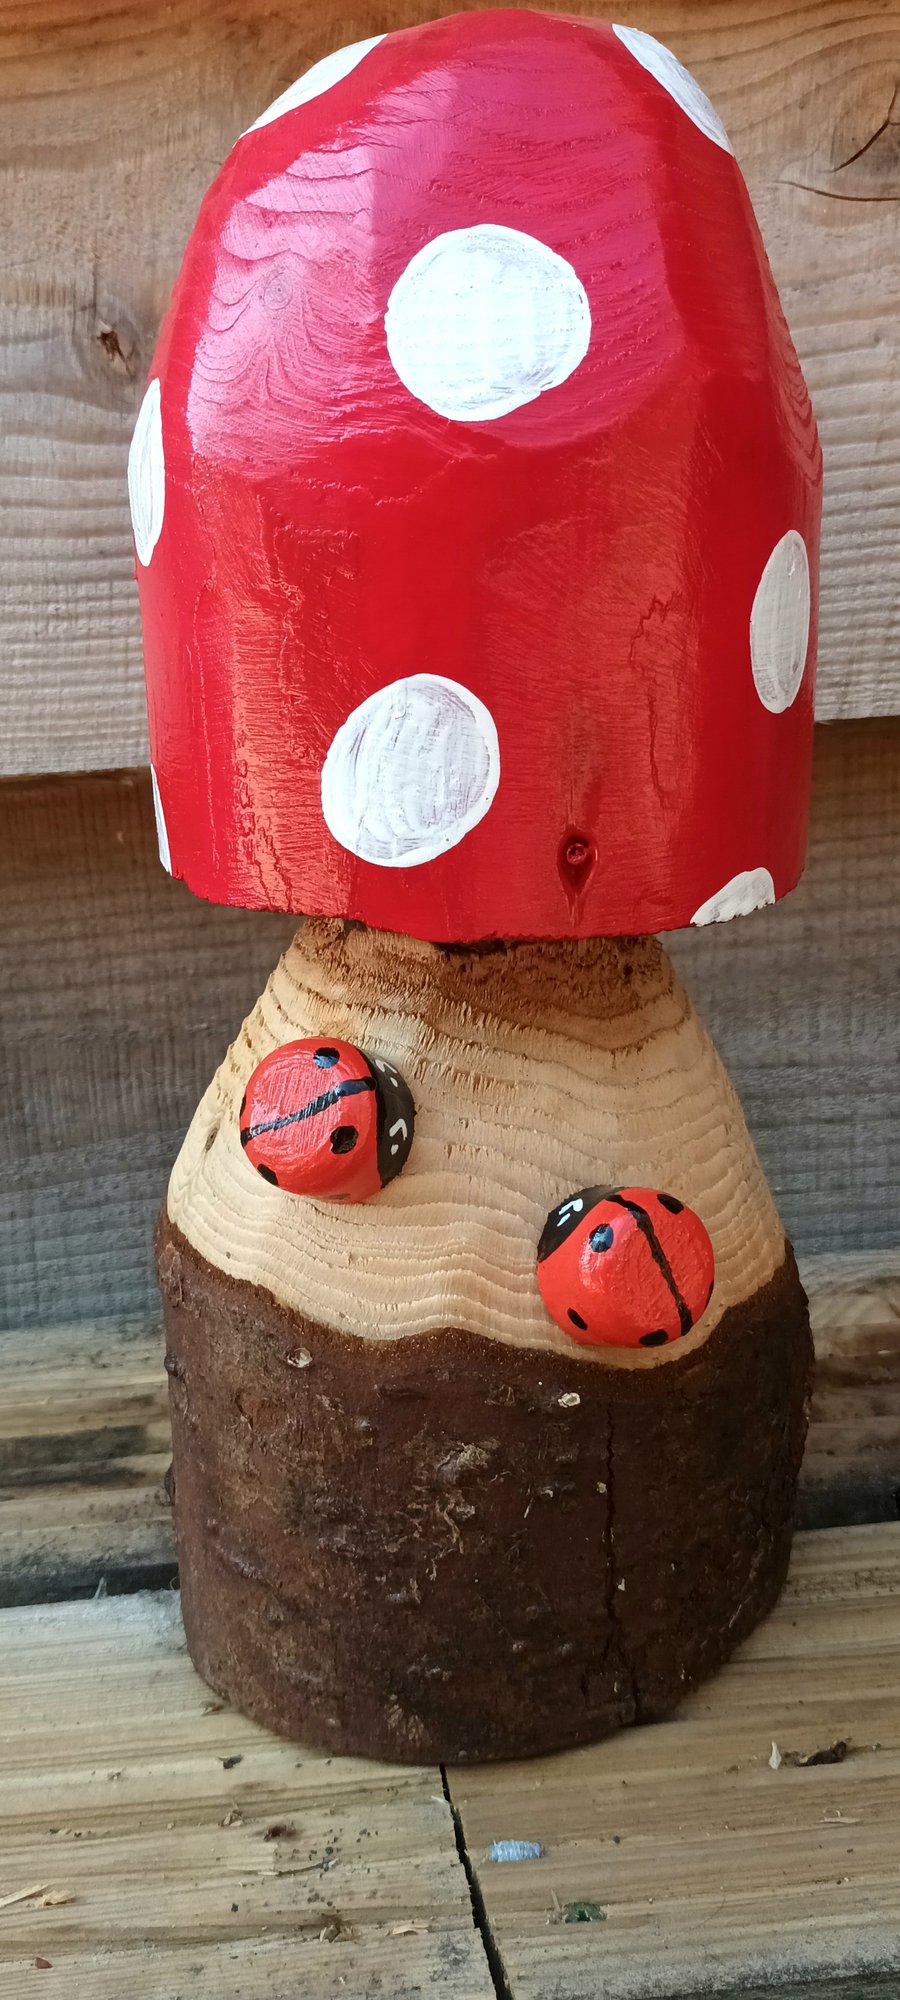 Red Spotty Toadstool